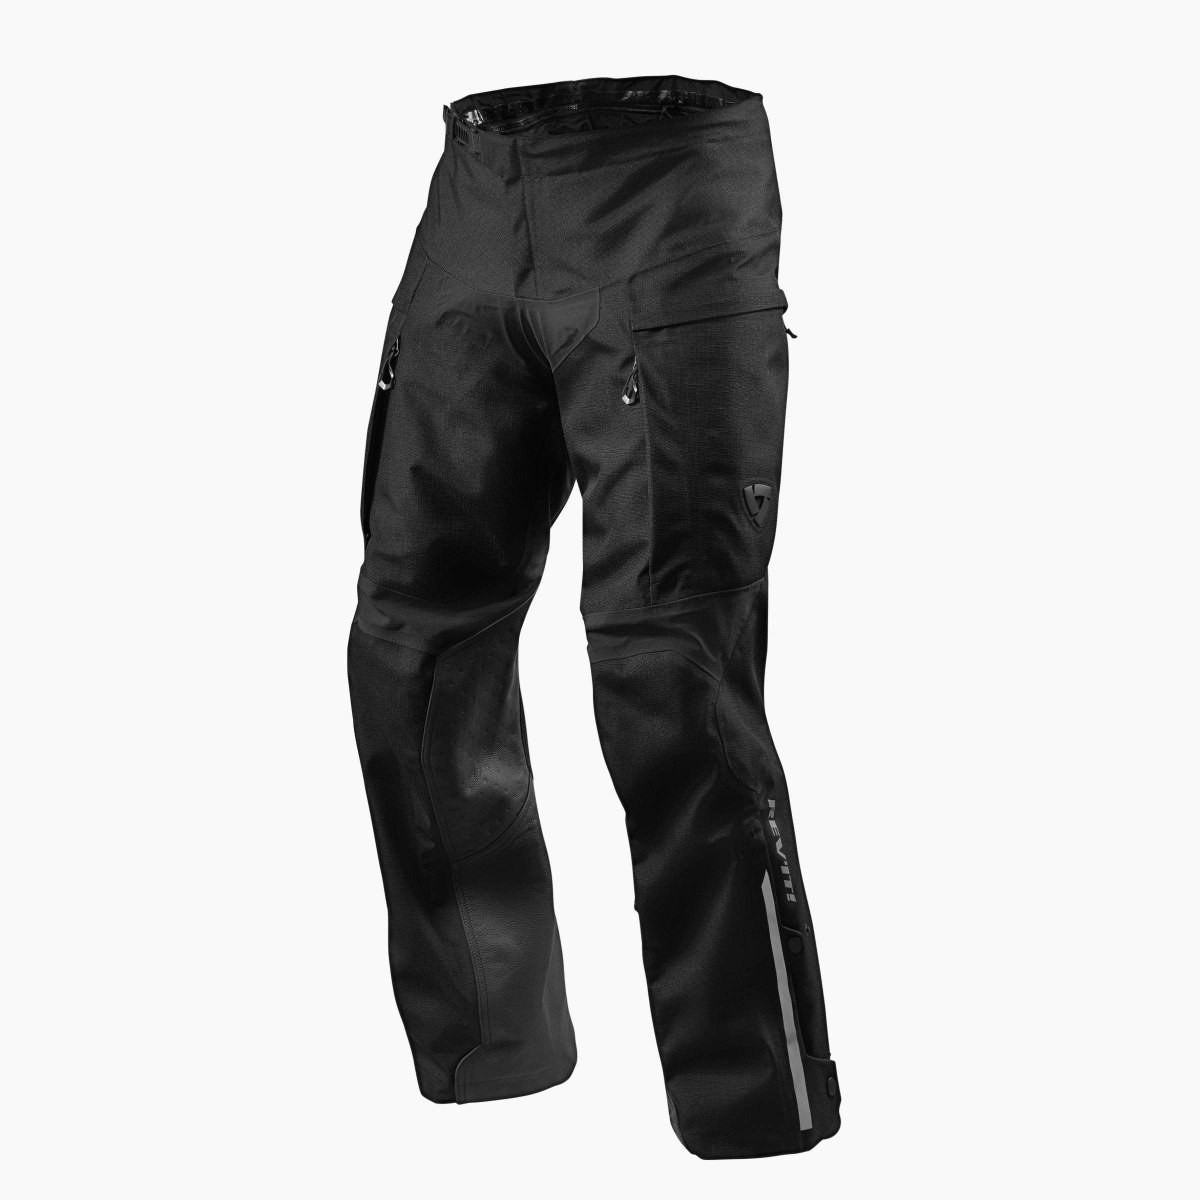 Image of EU REV'IT! Component H2O Long Black Motorcycle Pants Taille XL